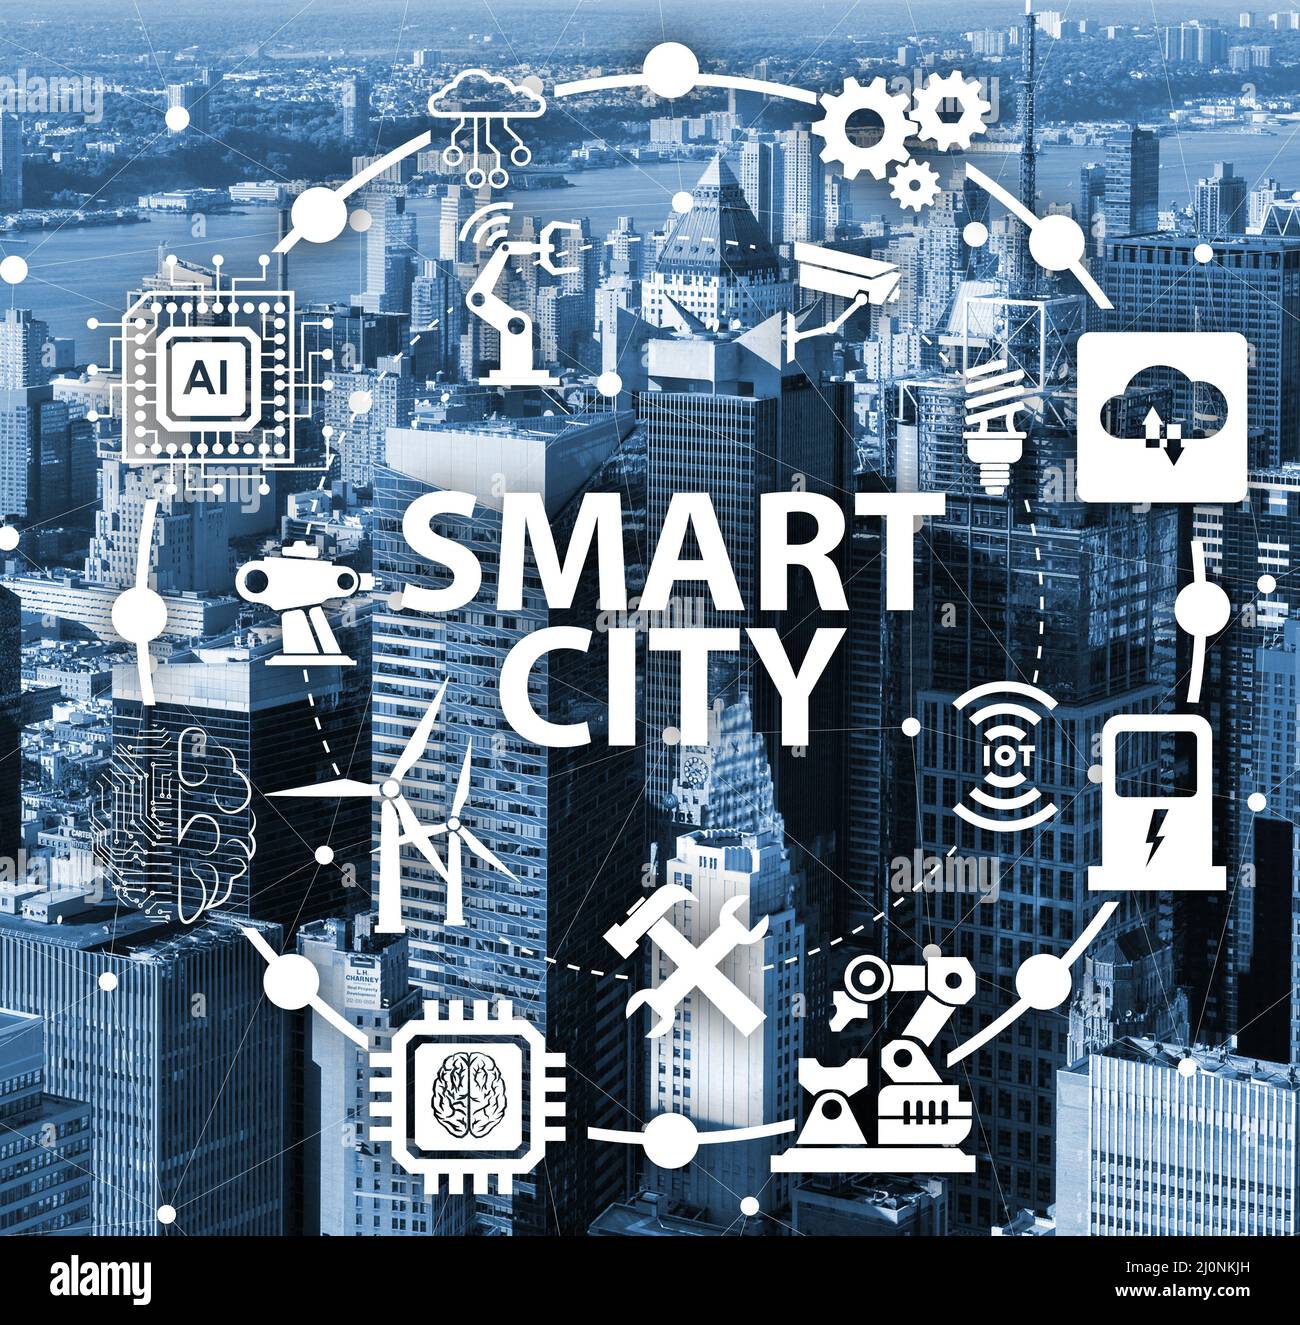 Concept of smart city and internet of things Stock Photo